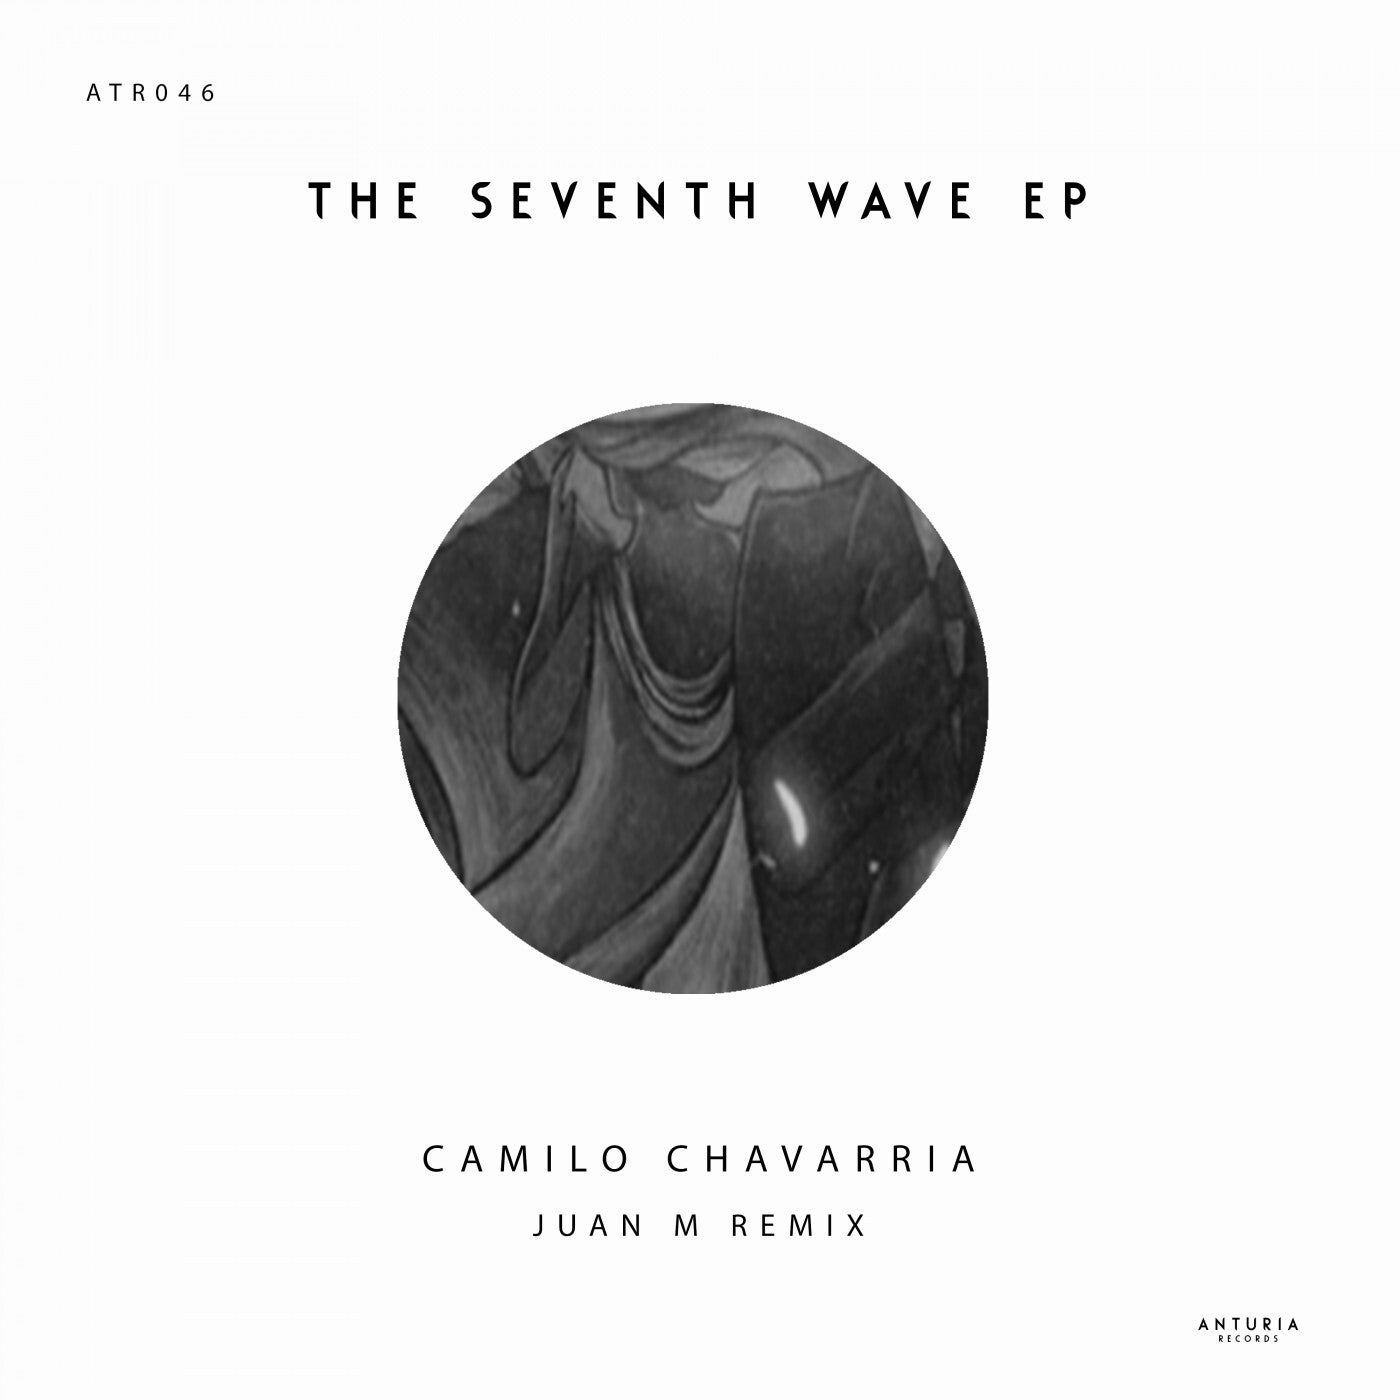 The Seventh Wave EP